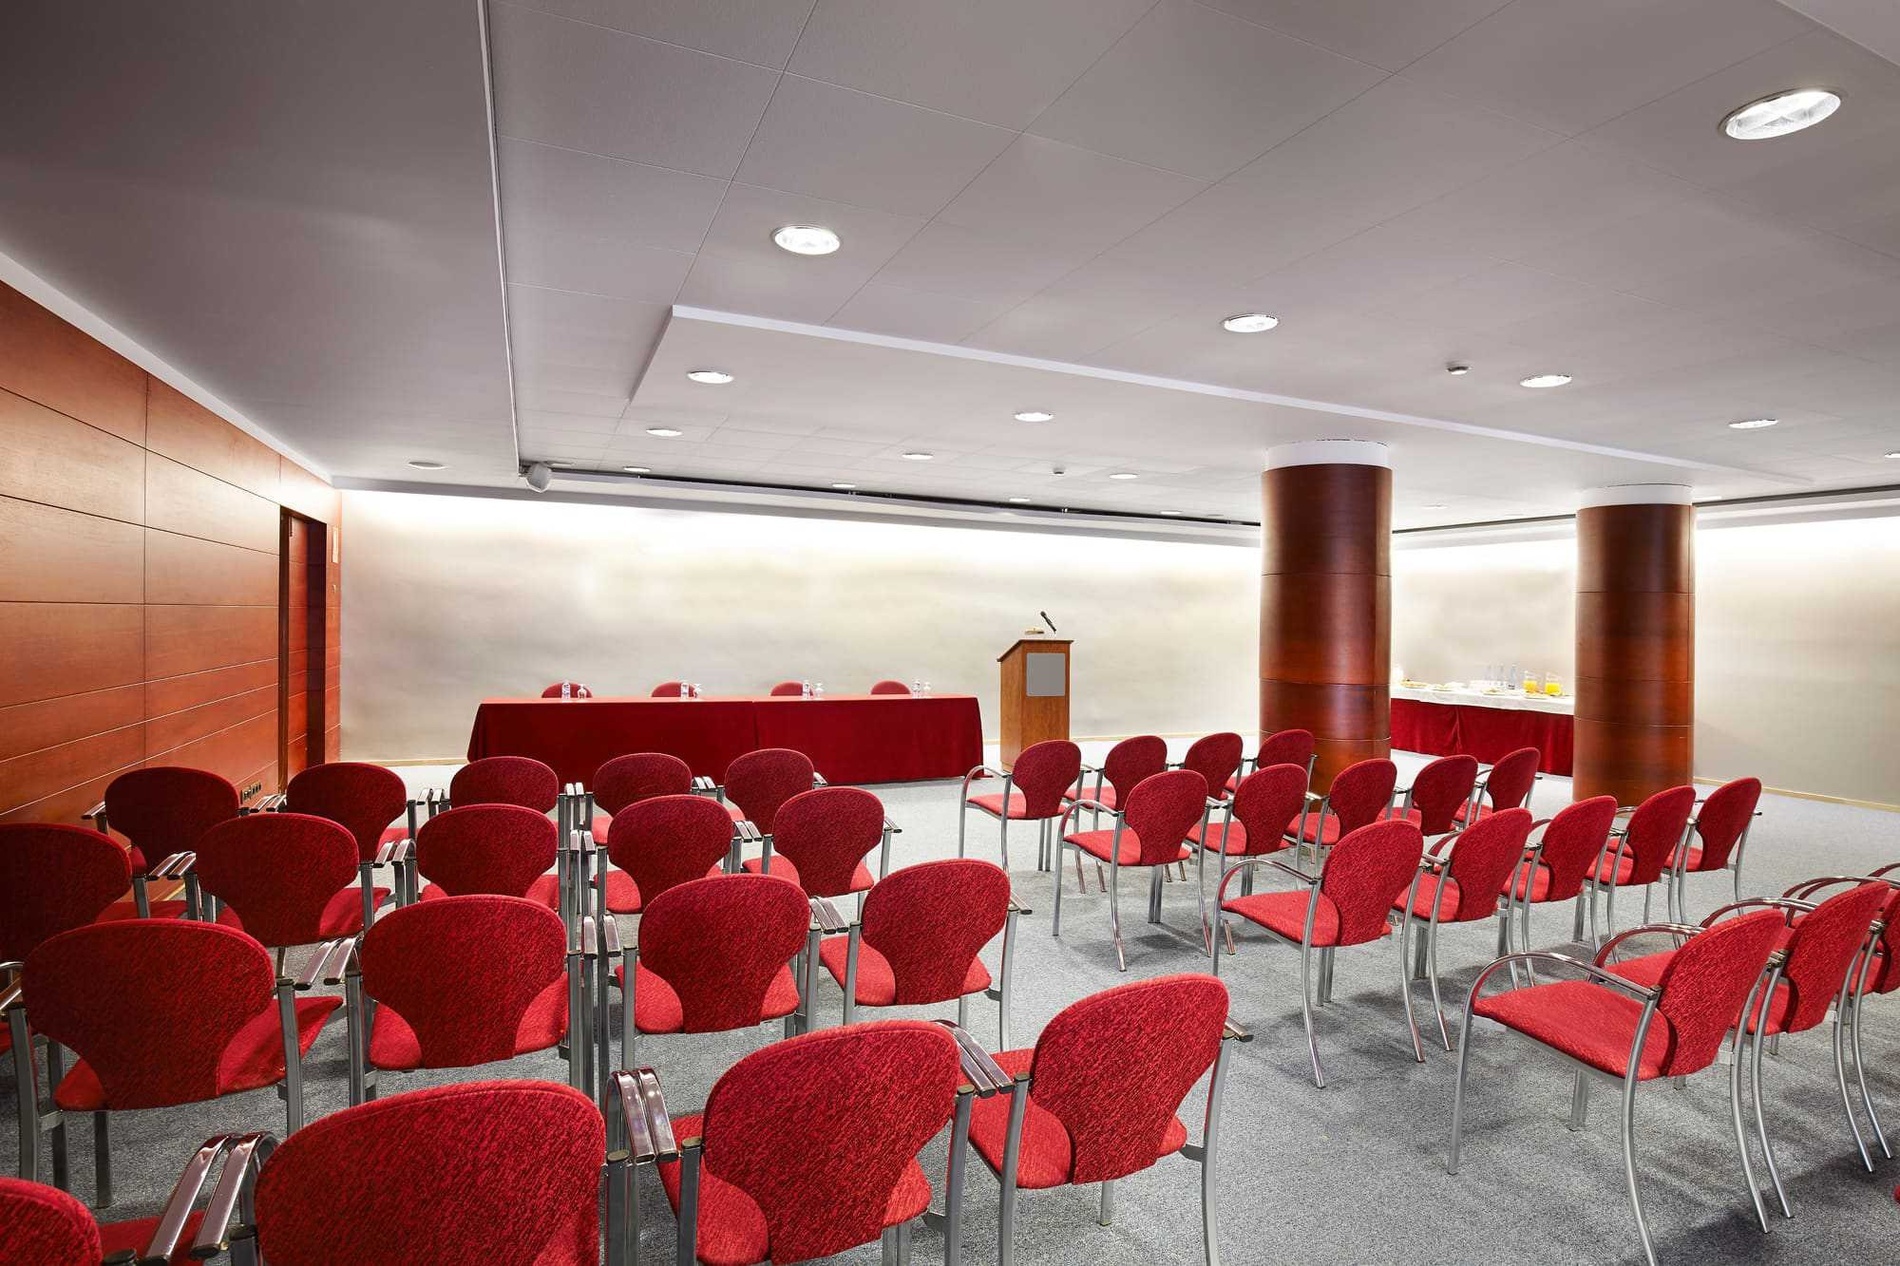 Room for events and business meetings in the center of Andorra